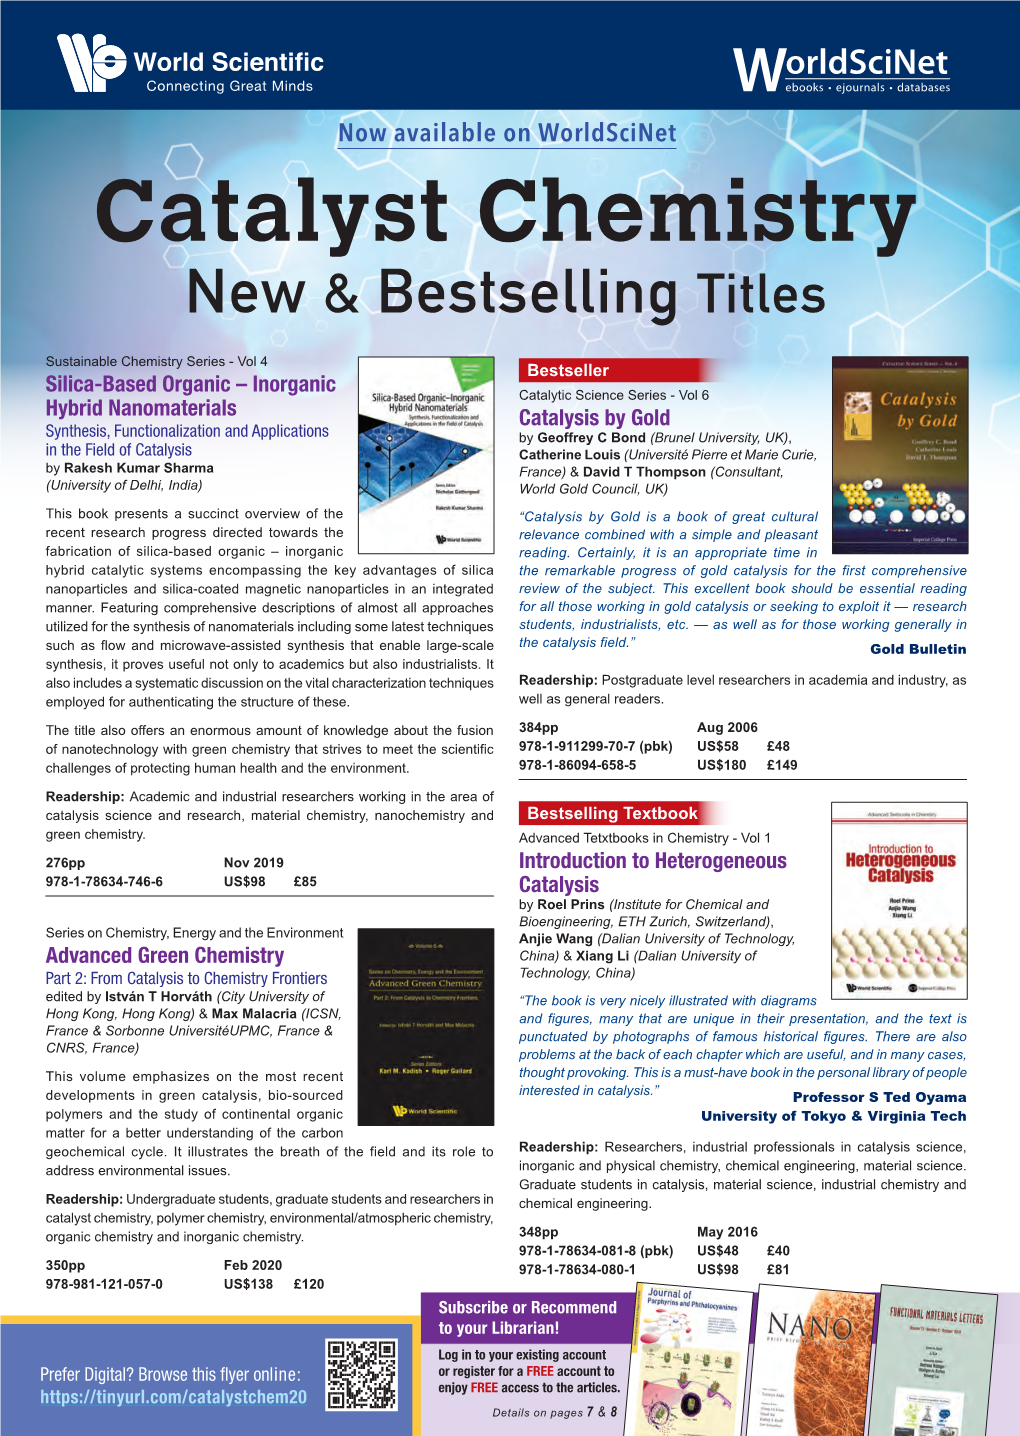 Catalyst Chemistry New & Bestselling Titles